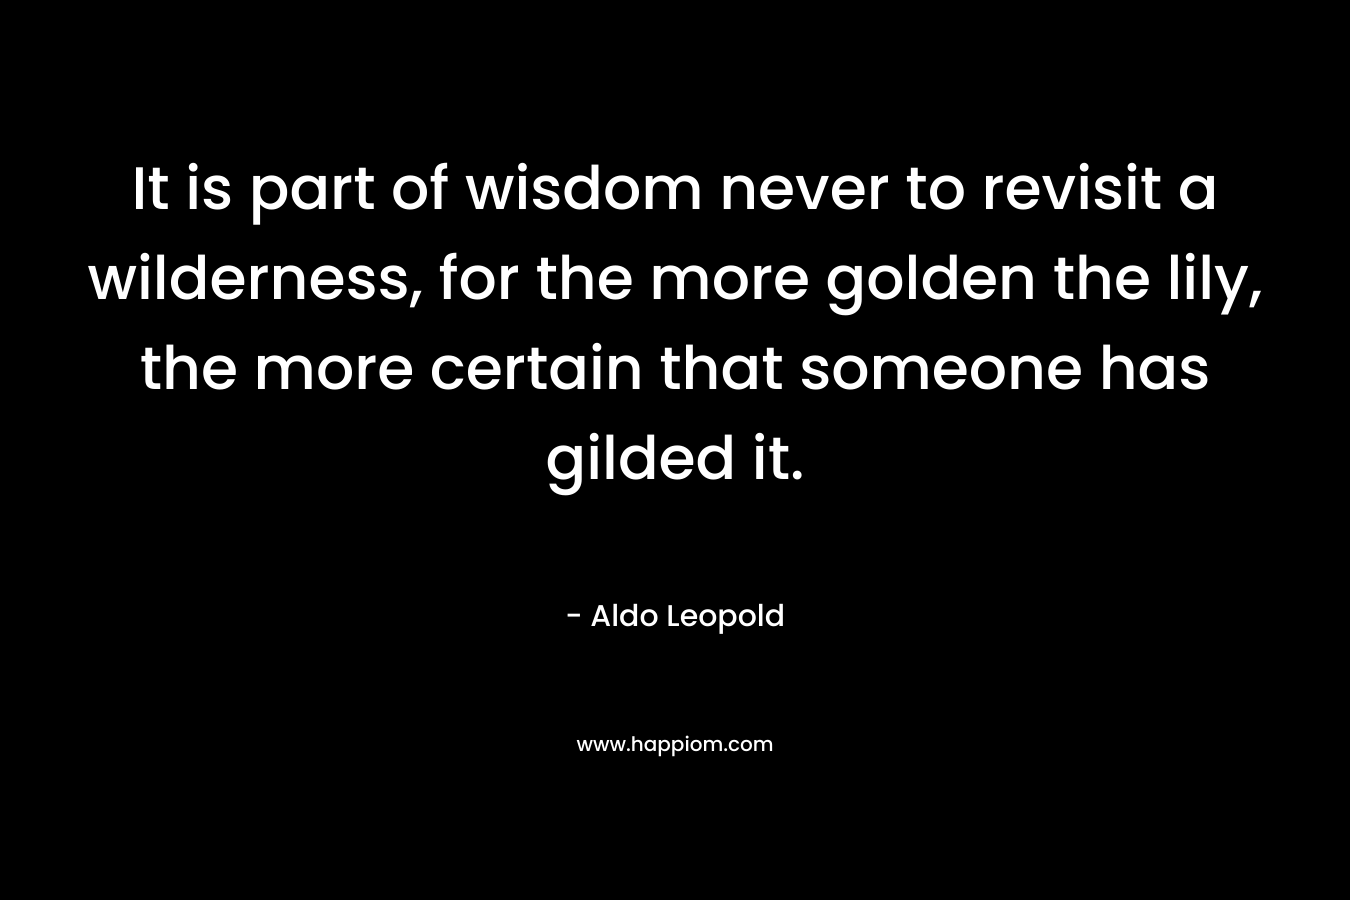 It is part of wisdom never to revisit a wilderness, for the more golden the lily, the more certain that someone has gilded it.